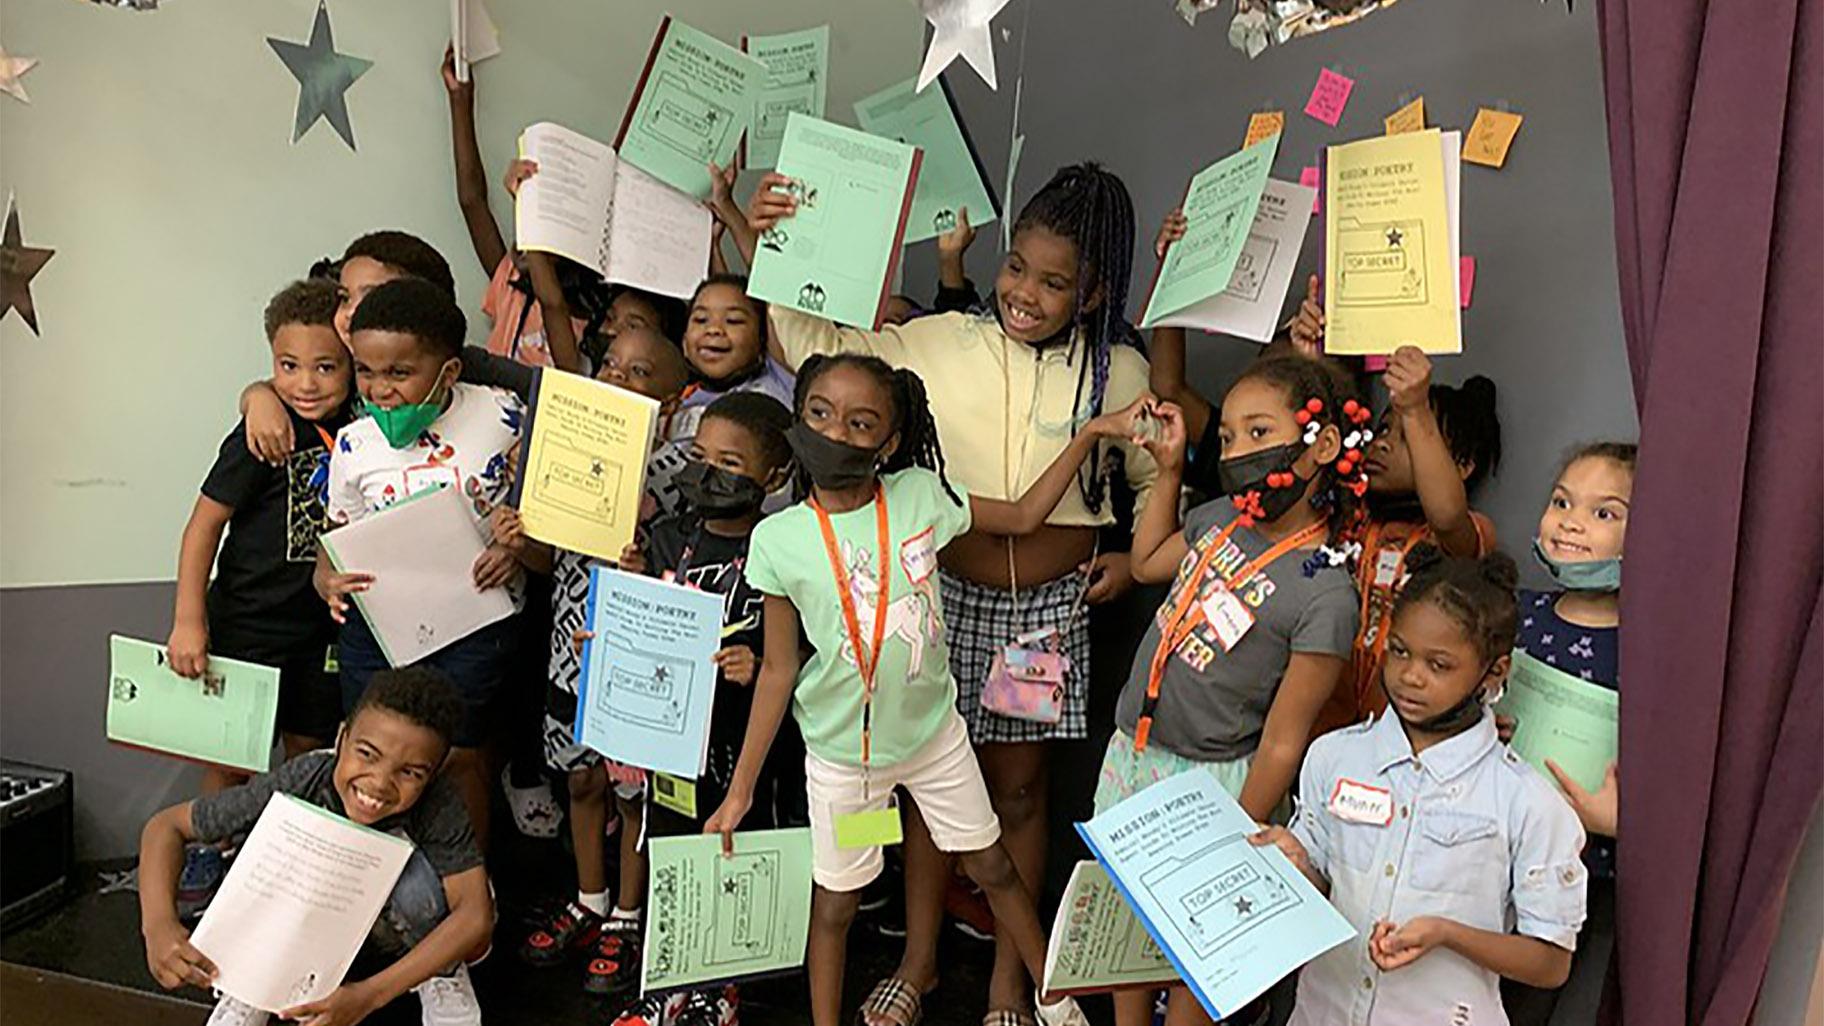 Grade 1 and 2 students from the James Jordan Boys and Girls Club after the Mission: Poetry Field Trip workshop at 826CHI's writing lab in Wicker Park.  (Courtesy of 826CHI)